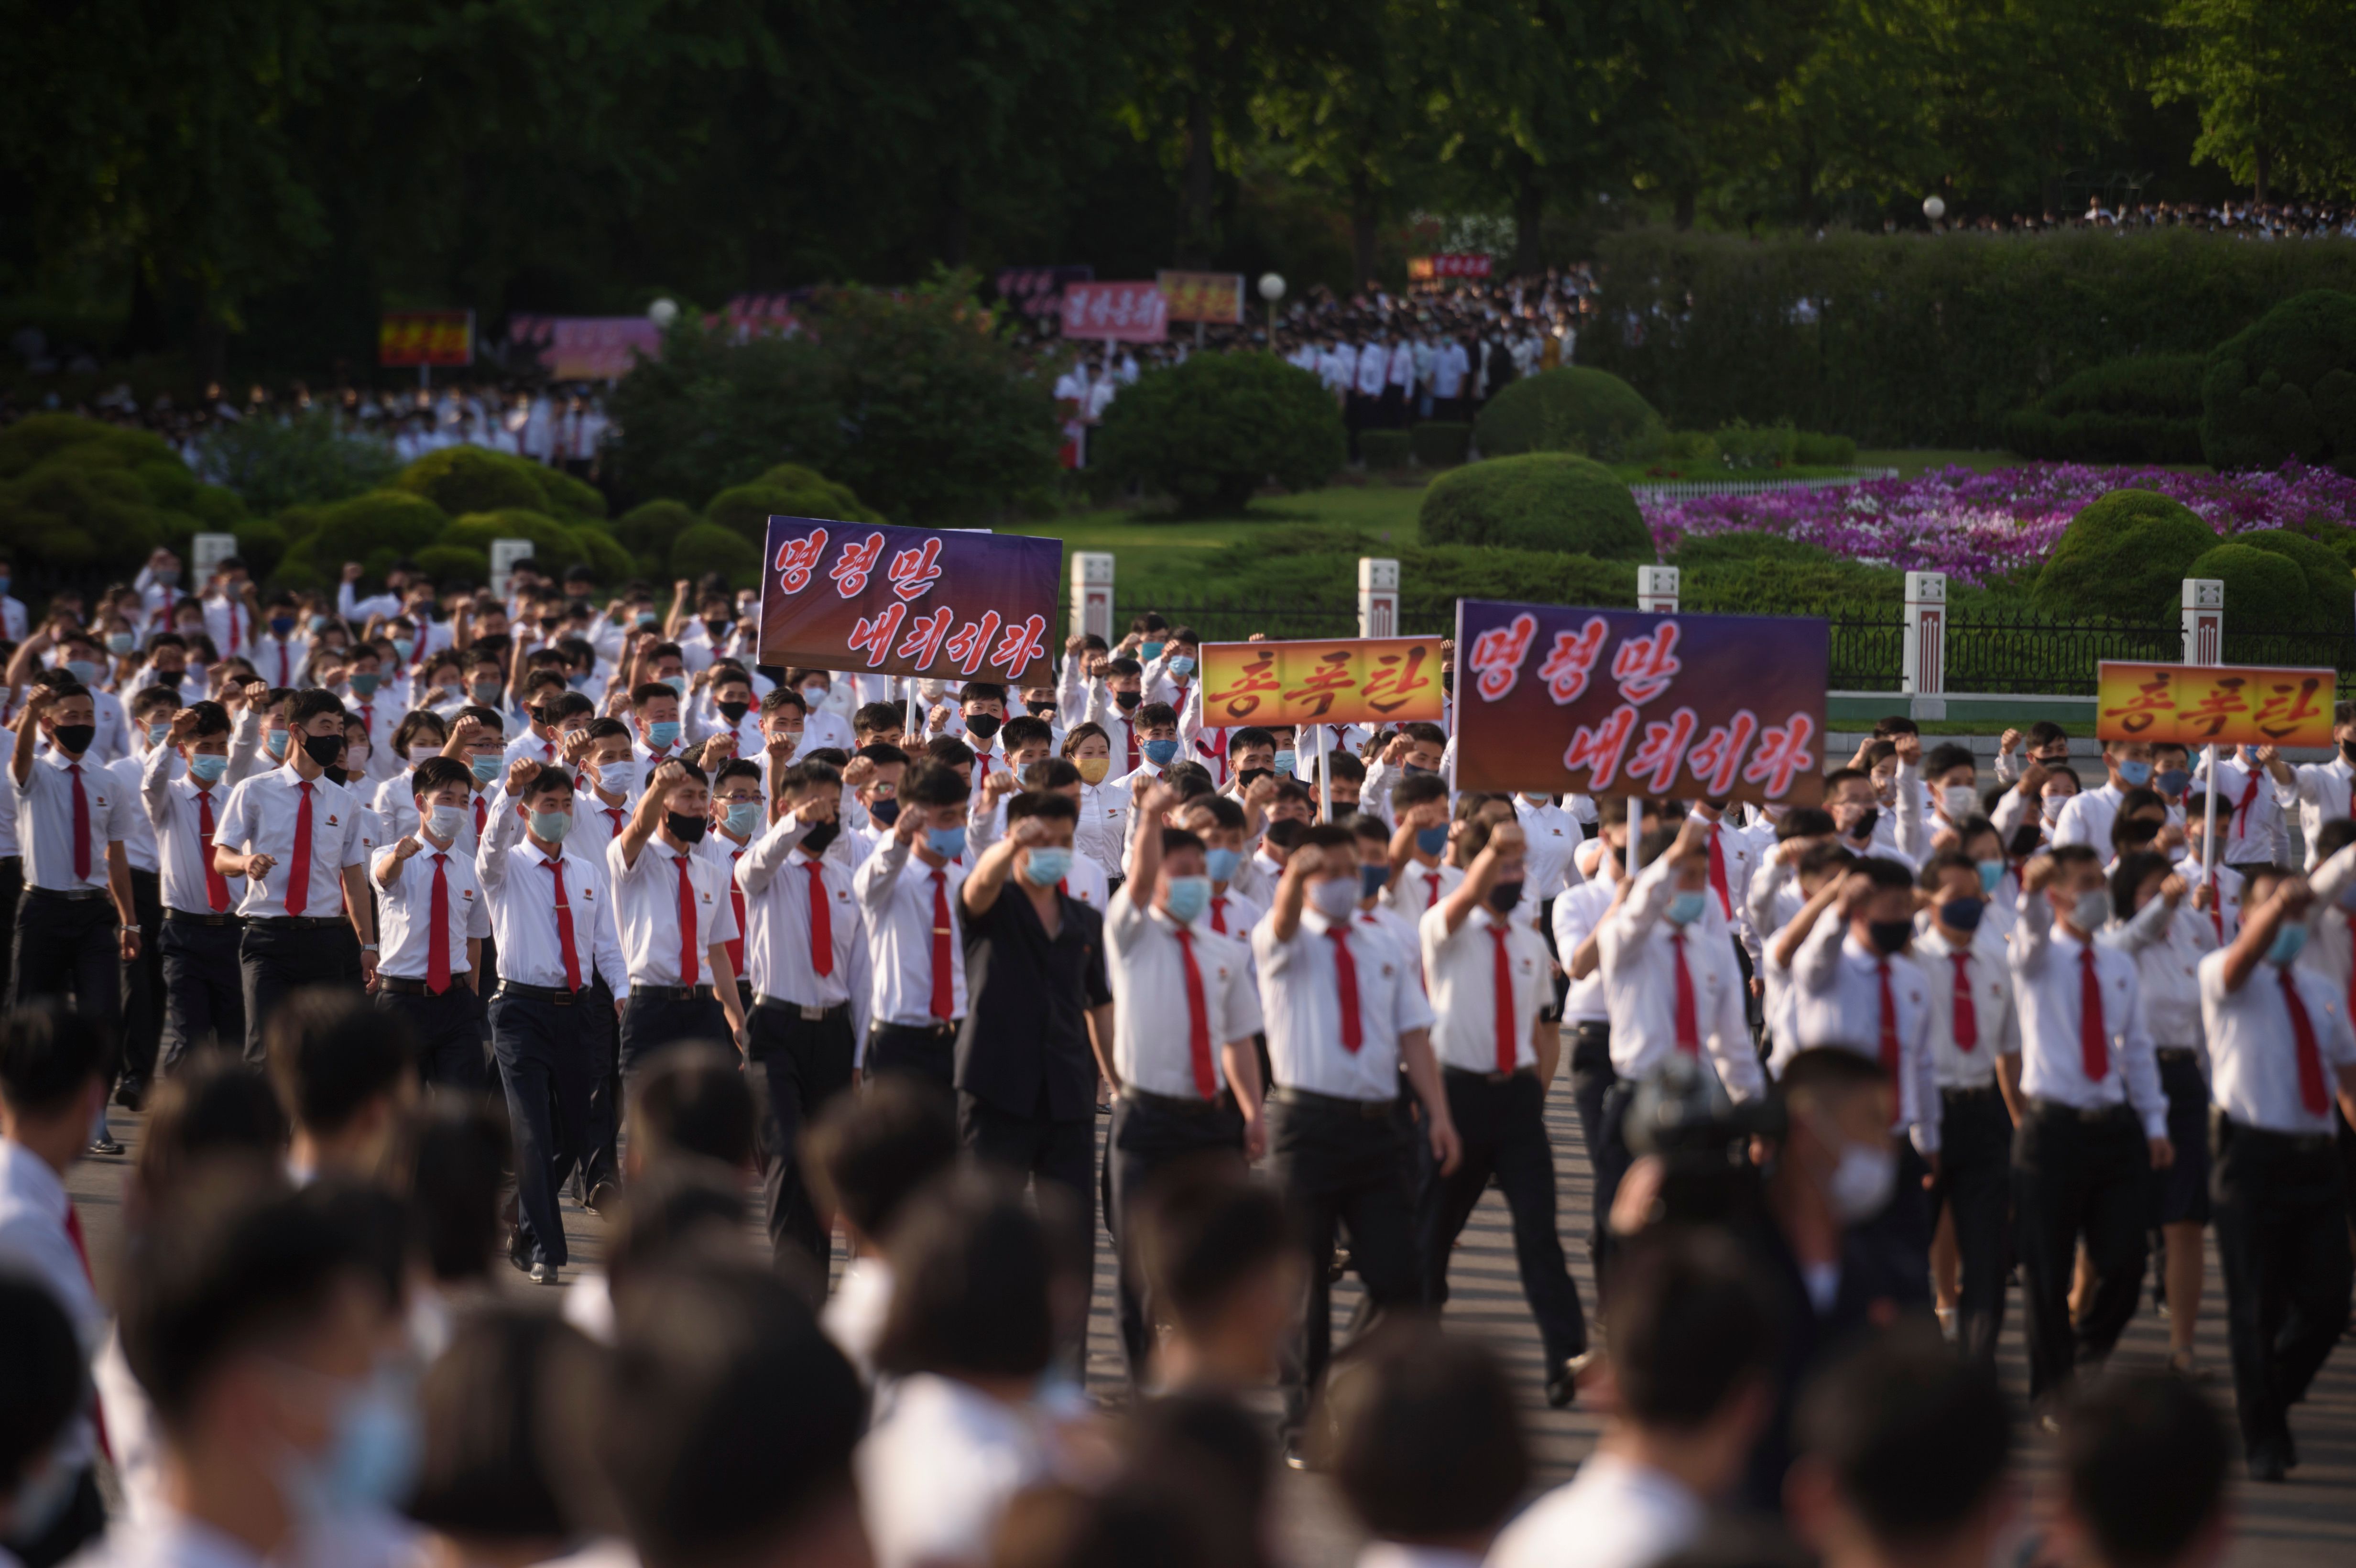 North Korean students take part in a rally denouncing 'defectors from the North' as they march from the Pyongyang Youth Park Open-Air Theatre to Kim Il Sung Square in Pyongyang on June 8, 2020.(Photo by KIM WON JIN/AFP via Getty Images)